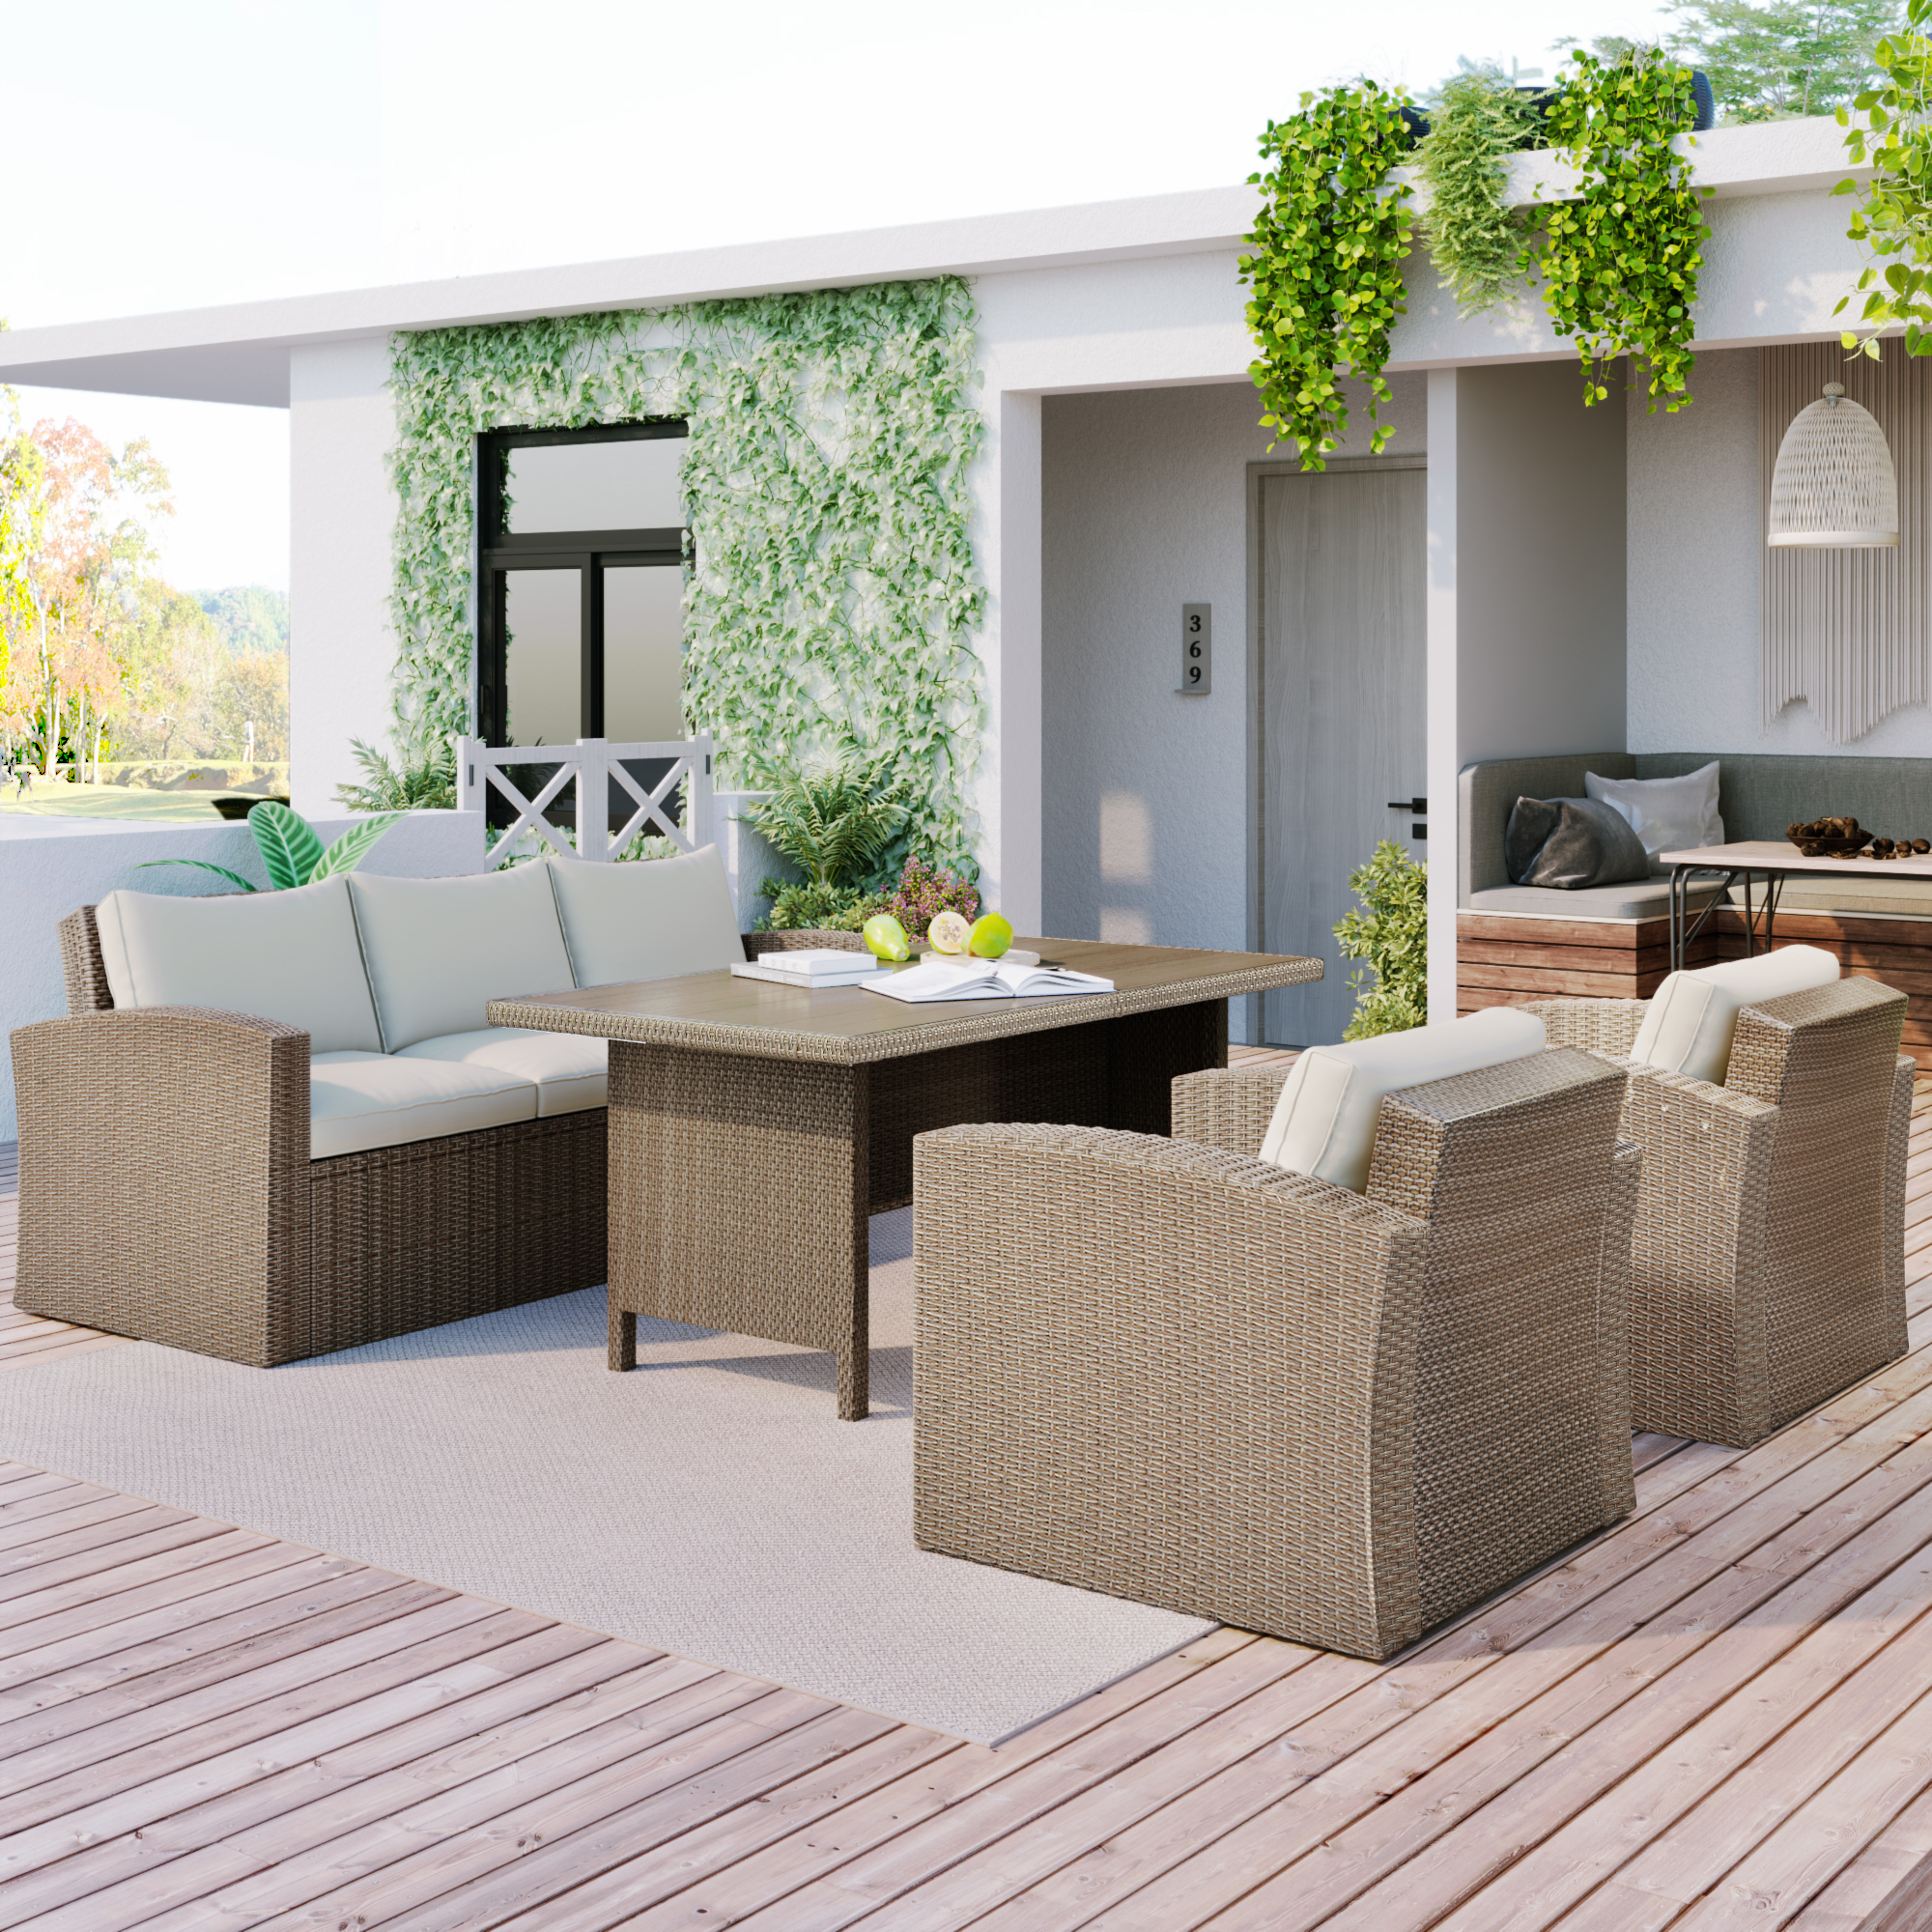 Andoer Outdoor Patio Furniture Set 4-Piece, Conversation Set Wicker Furniture Sofa Set with Beige Cushions - image 2 of 7